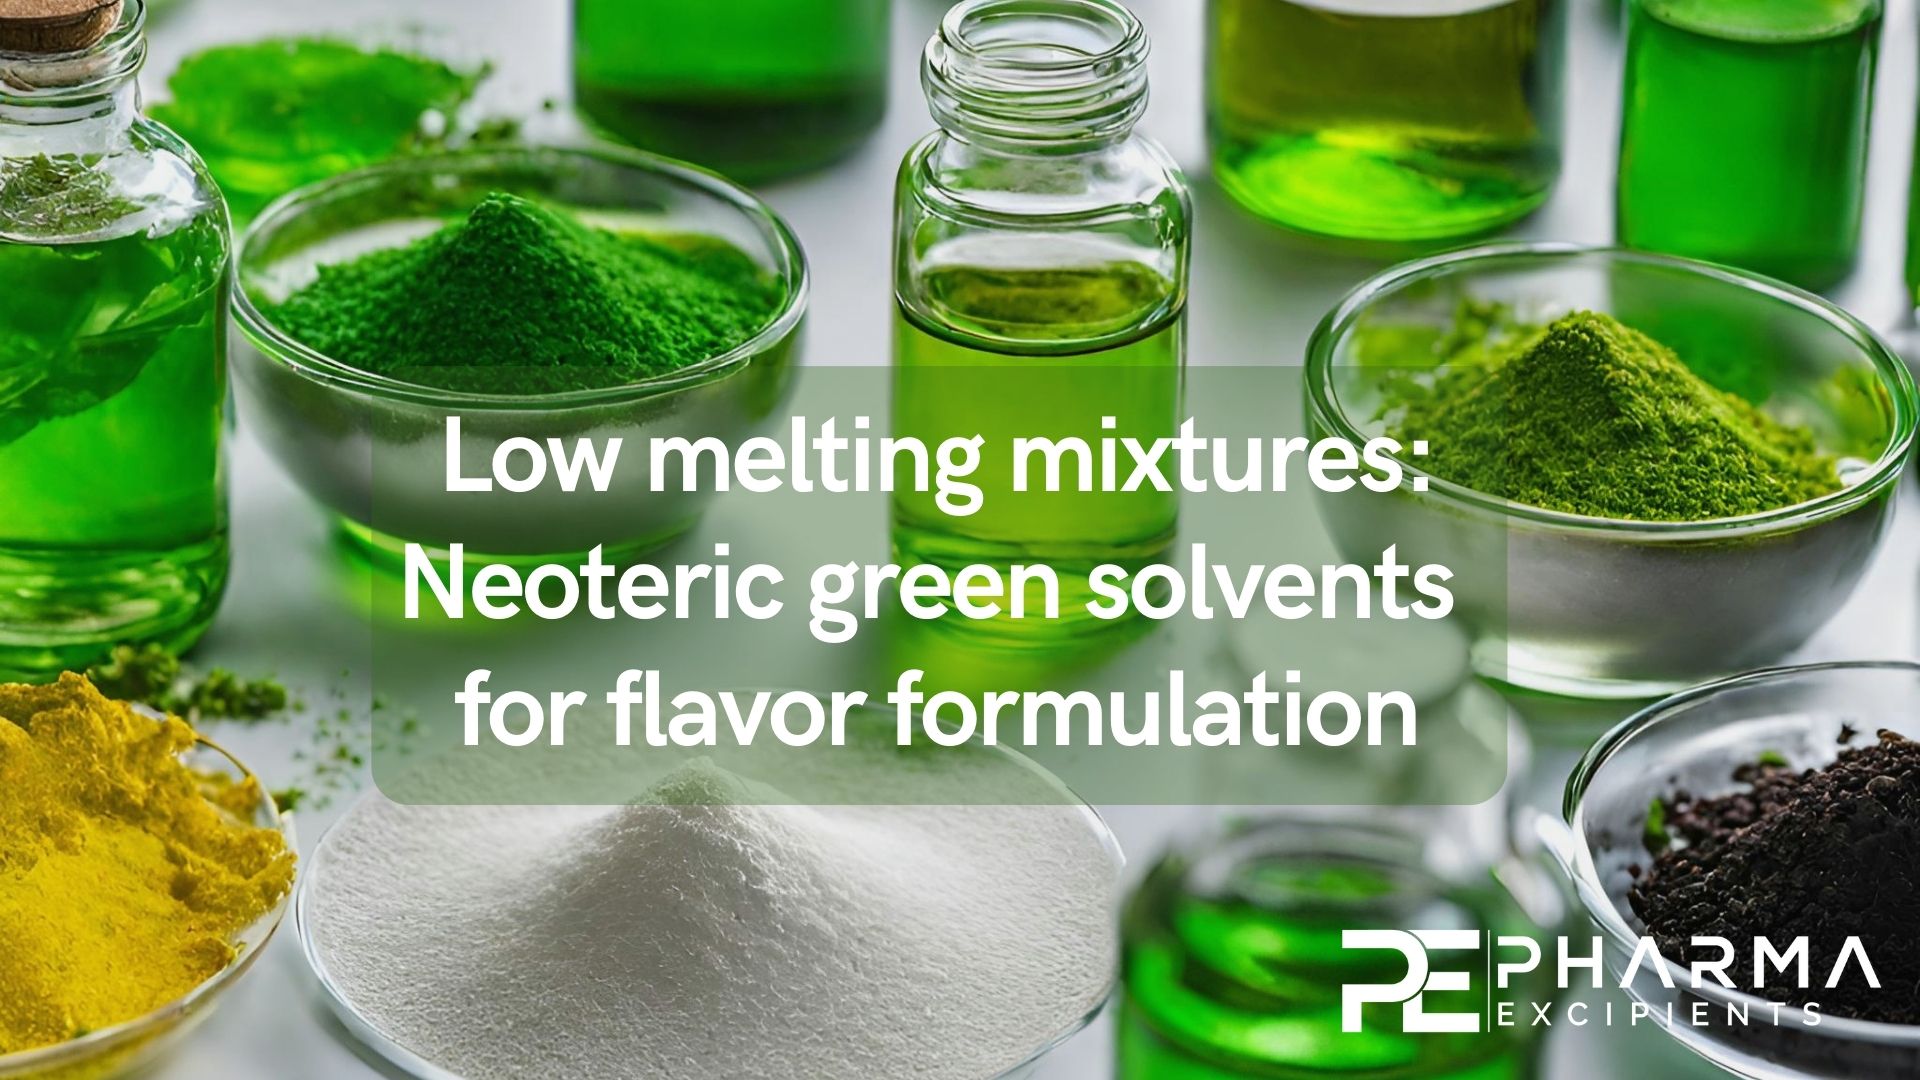 Low-melting-mixtures-neoteric-green-solvents-for-flavor-formulation